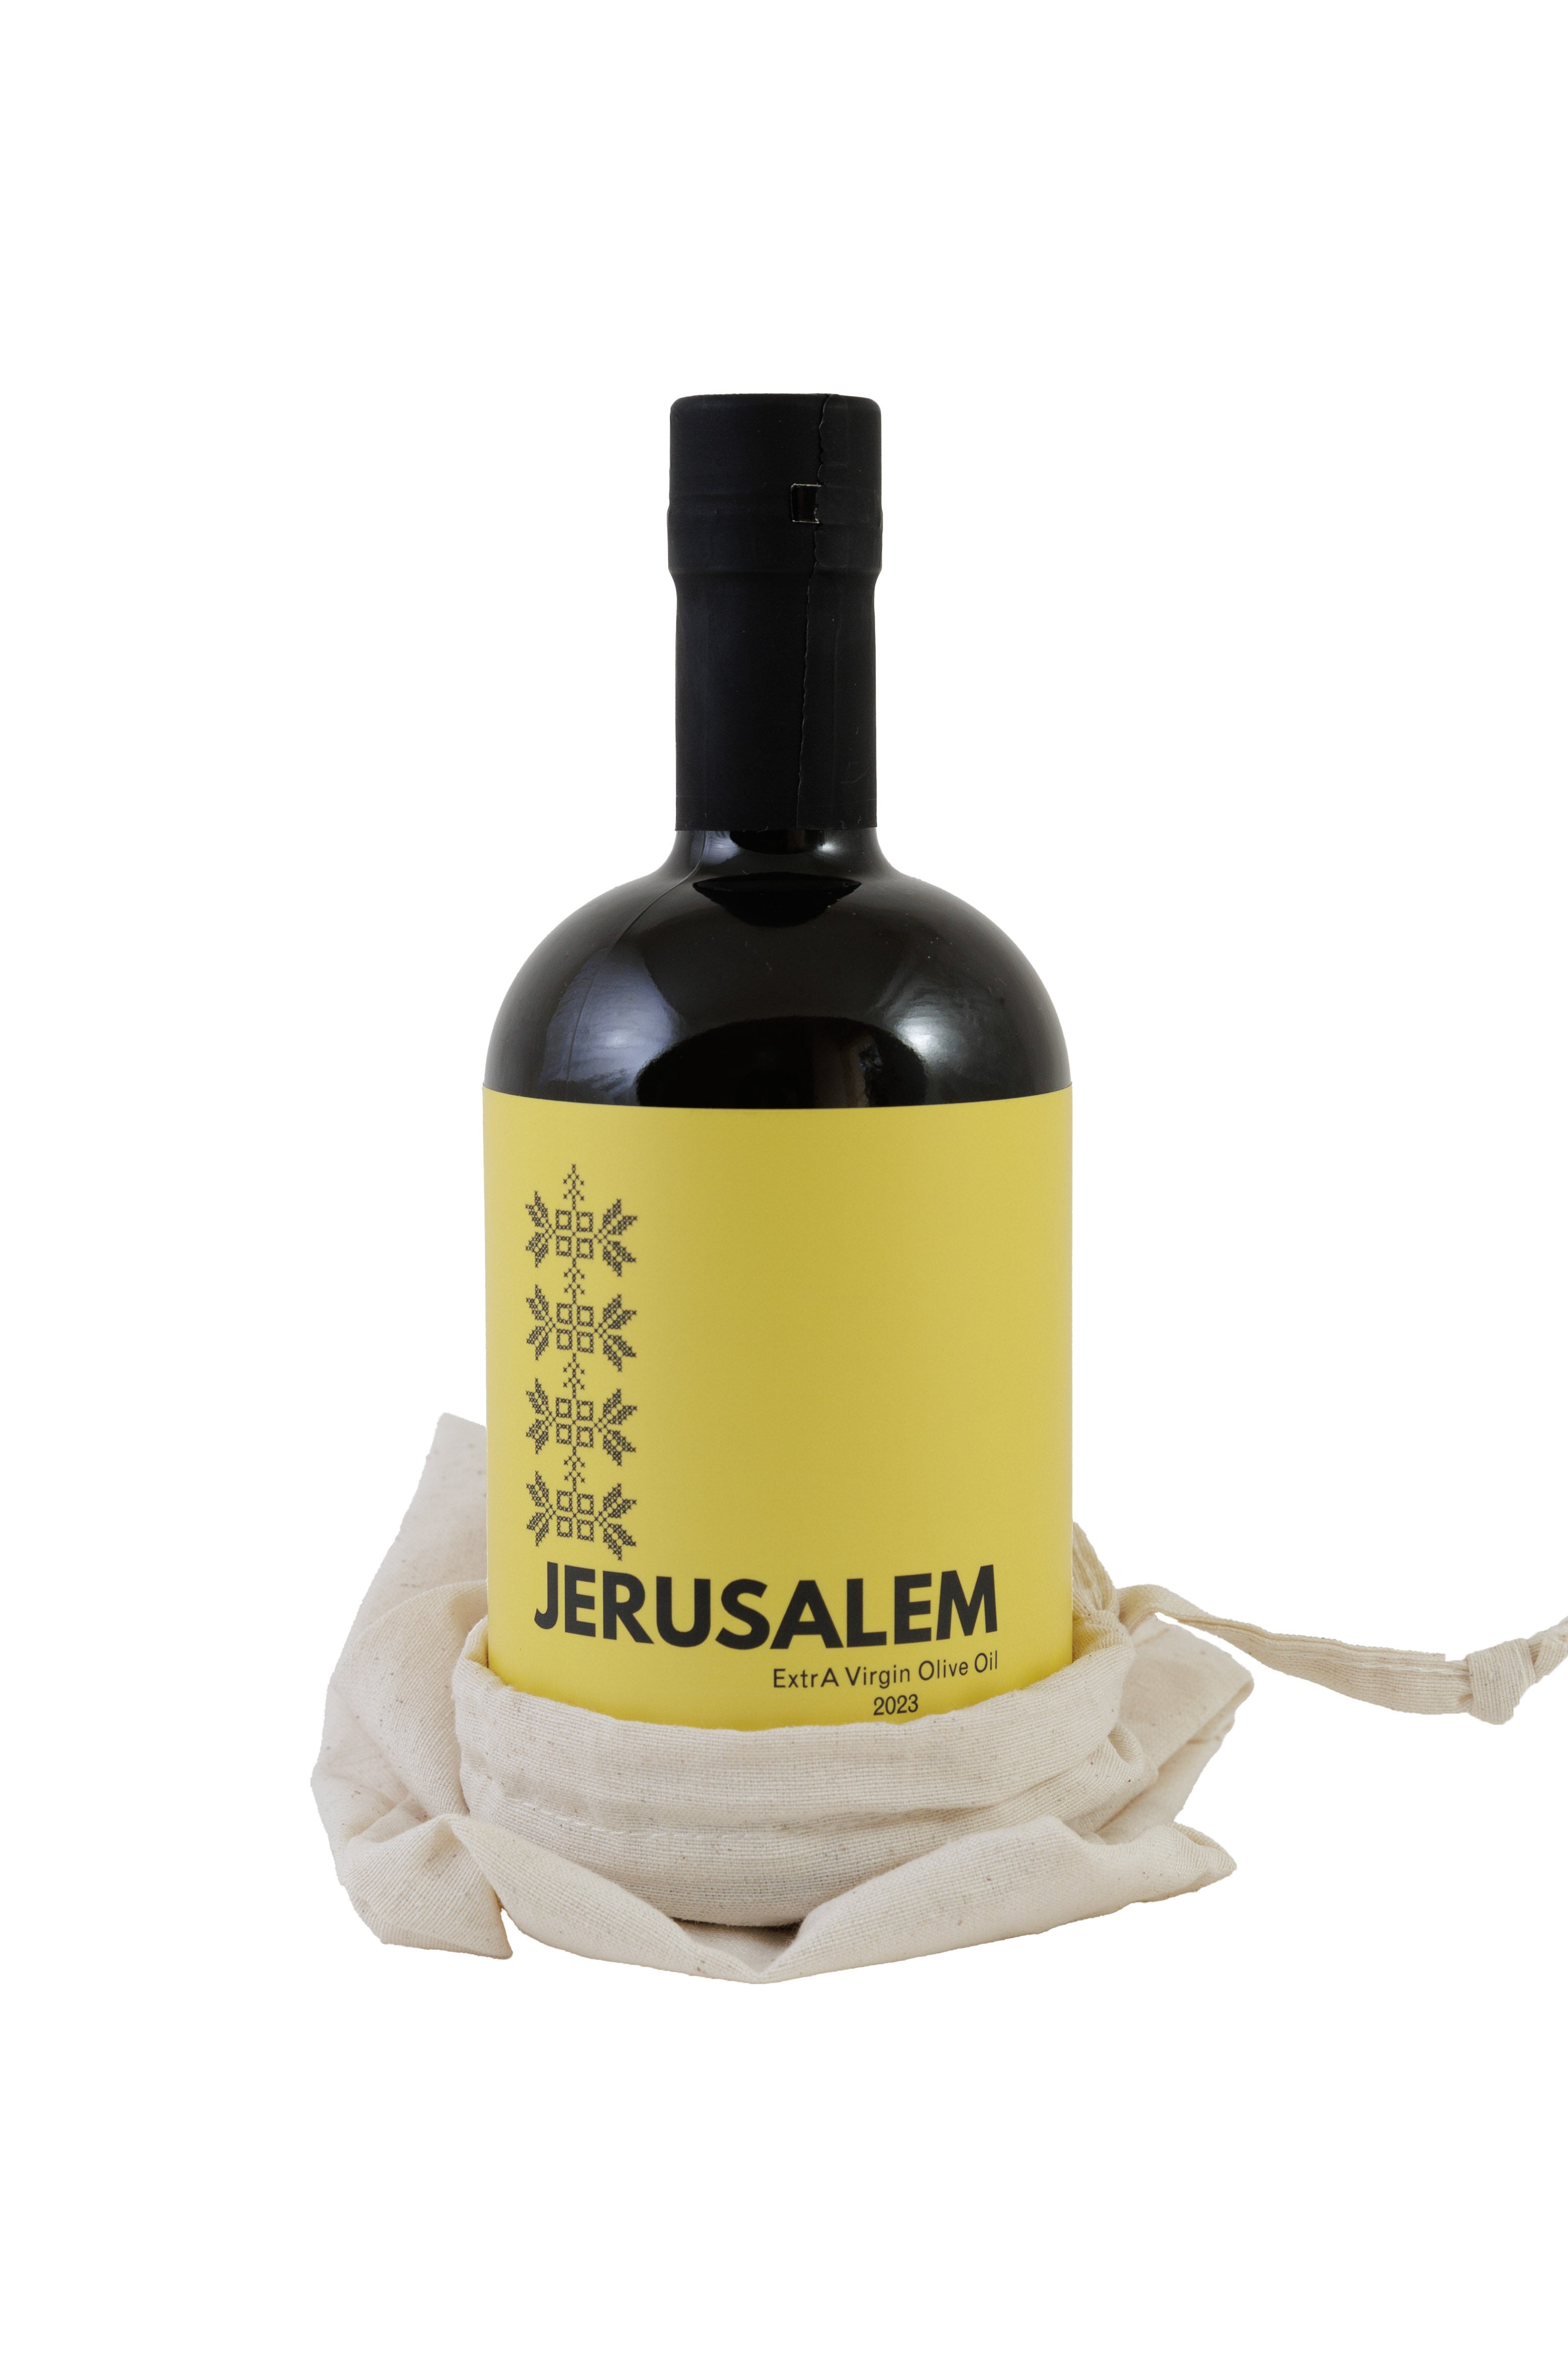 Jerusalem's Cold Pressed Extracted Olive Oil - Full Bodied and Aromatic [Harvest Year: 2023]